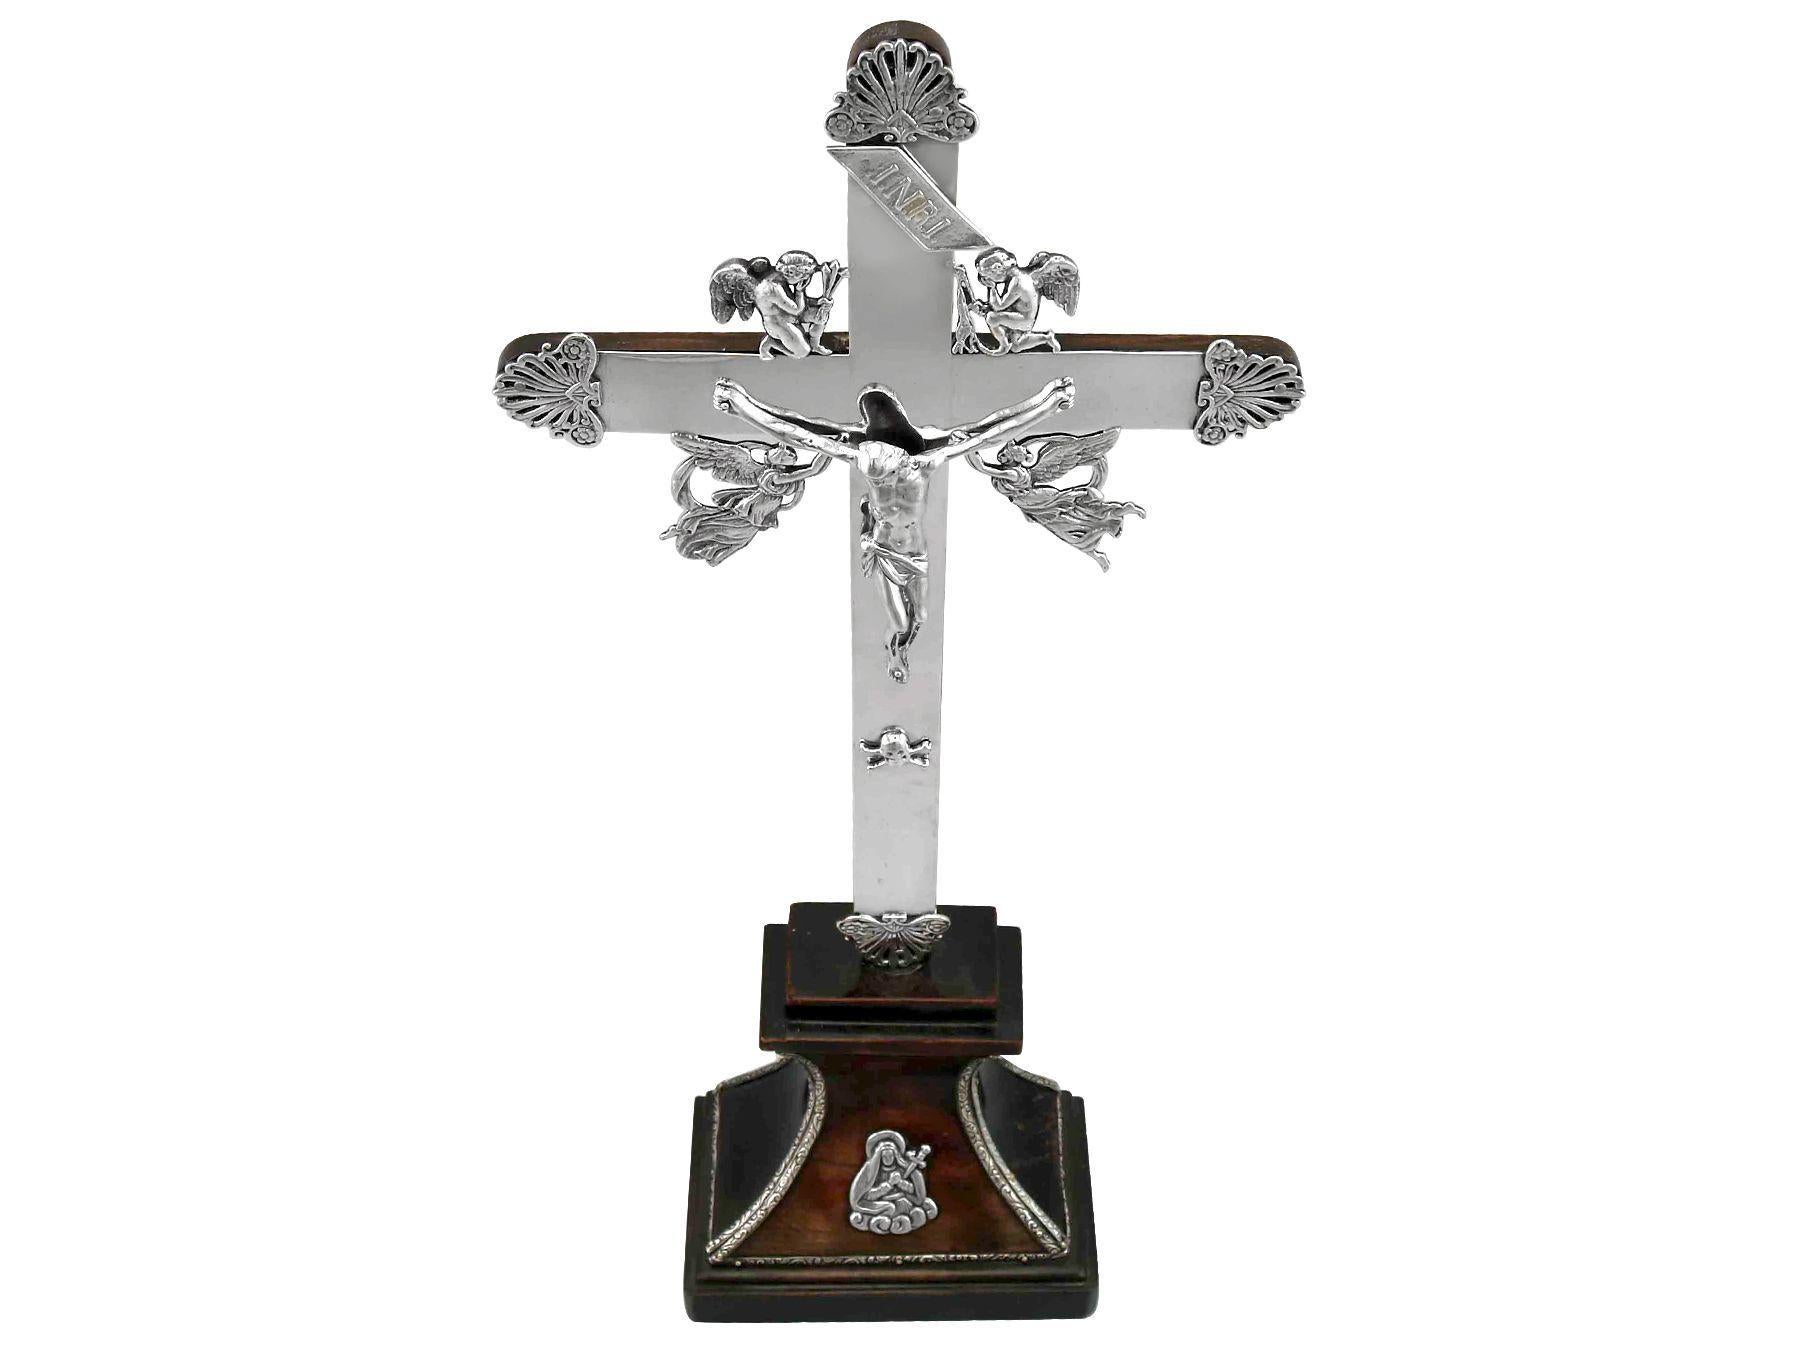 An exceptional, fine and impressive antique 1800s Italian silver travelling crucifix; an addition to our religious silverware collection.

This exceptional antique Italian silver travelling crucifix has been crafted with an oak wood back.

The